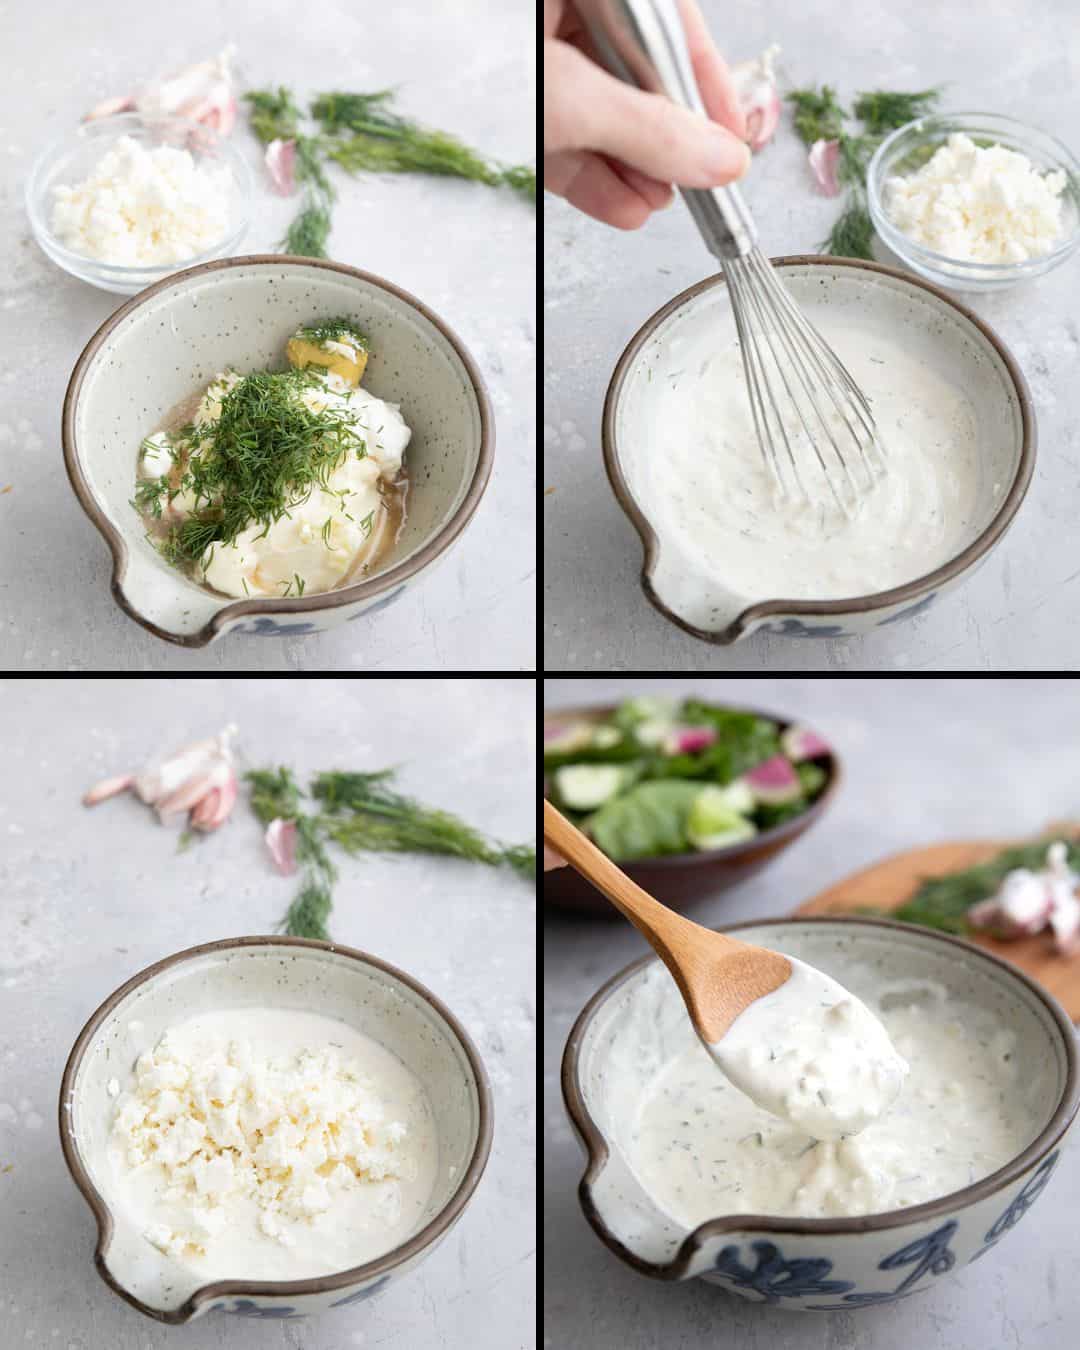 A collage of 4 images showing how to make Feta Dressing.